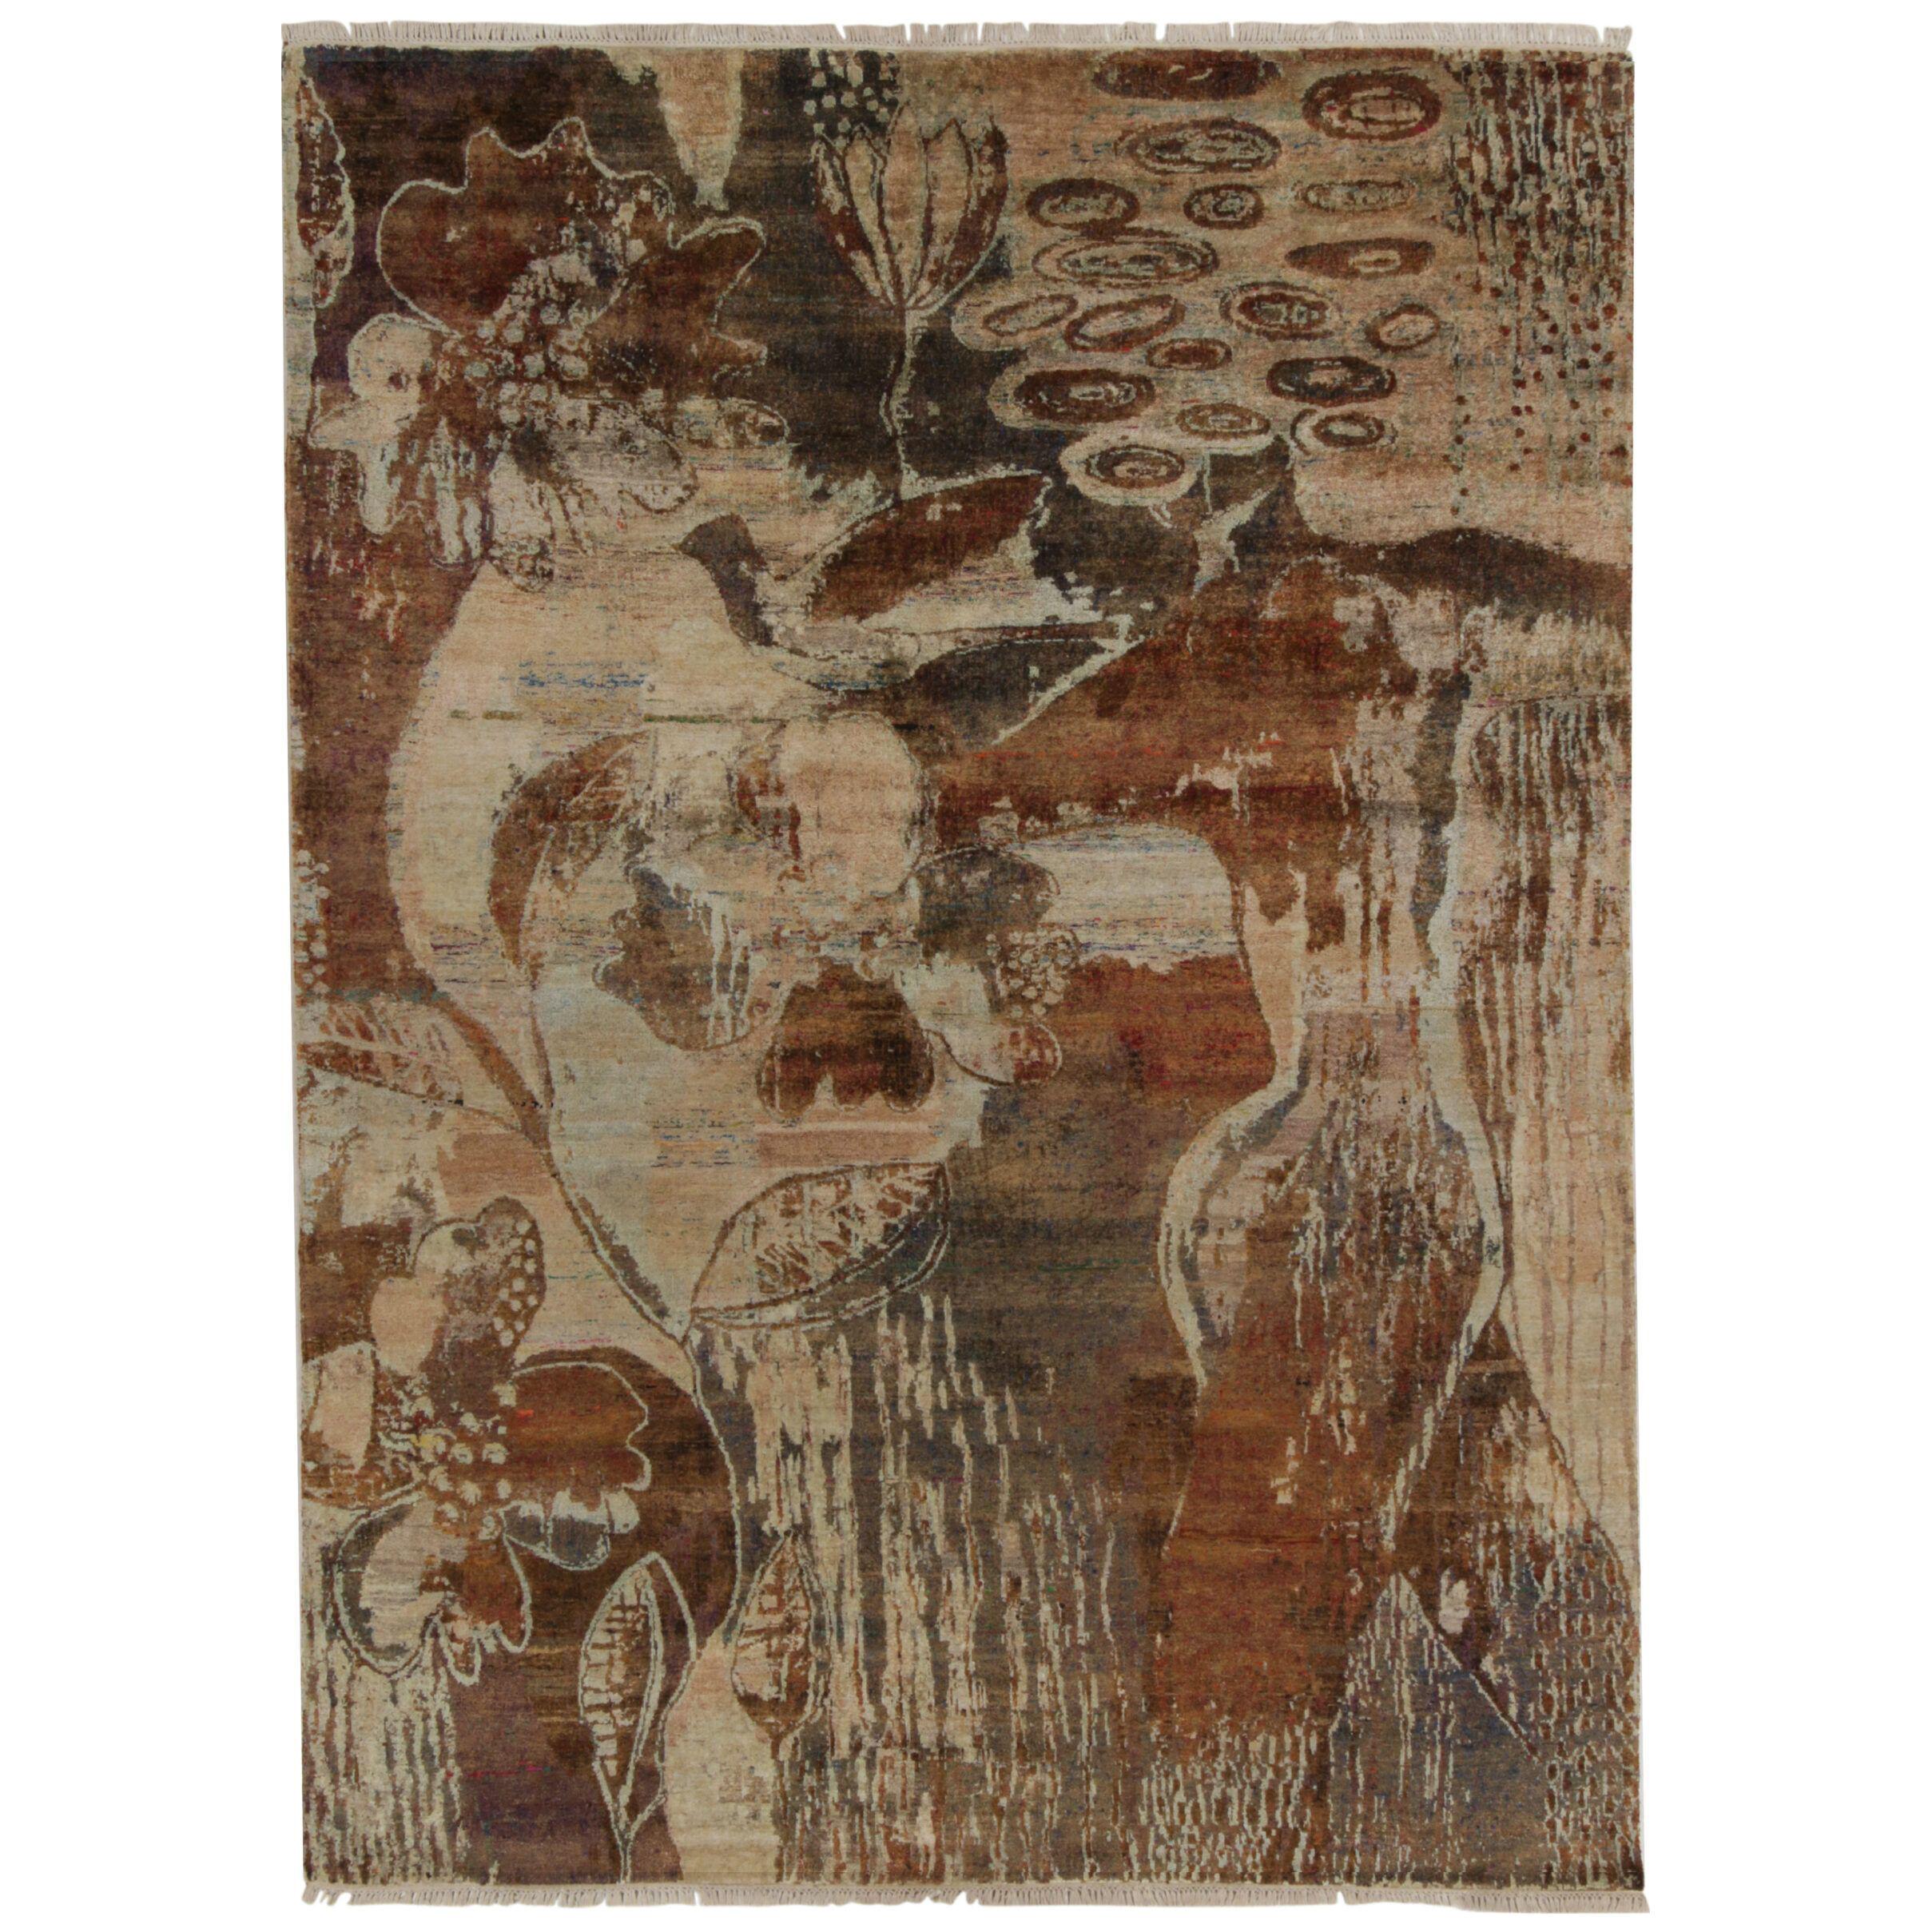 Rug & Kilim’s Impressionist Style Abstract Rug in Beige-Brown Floral Patterns